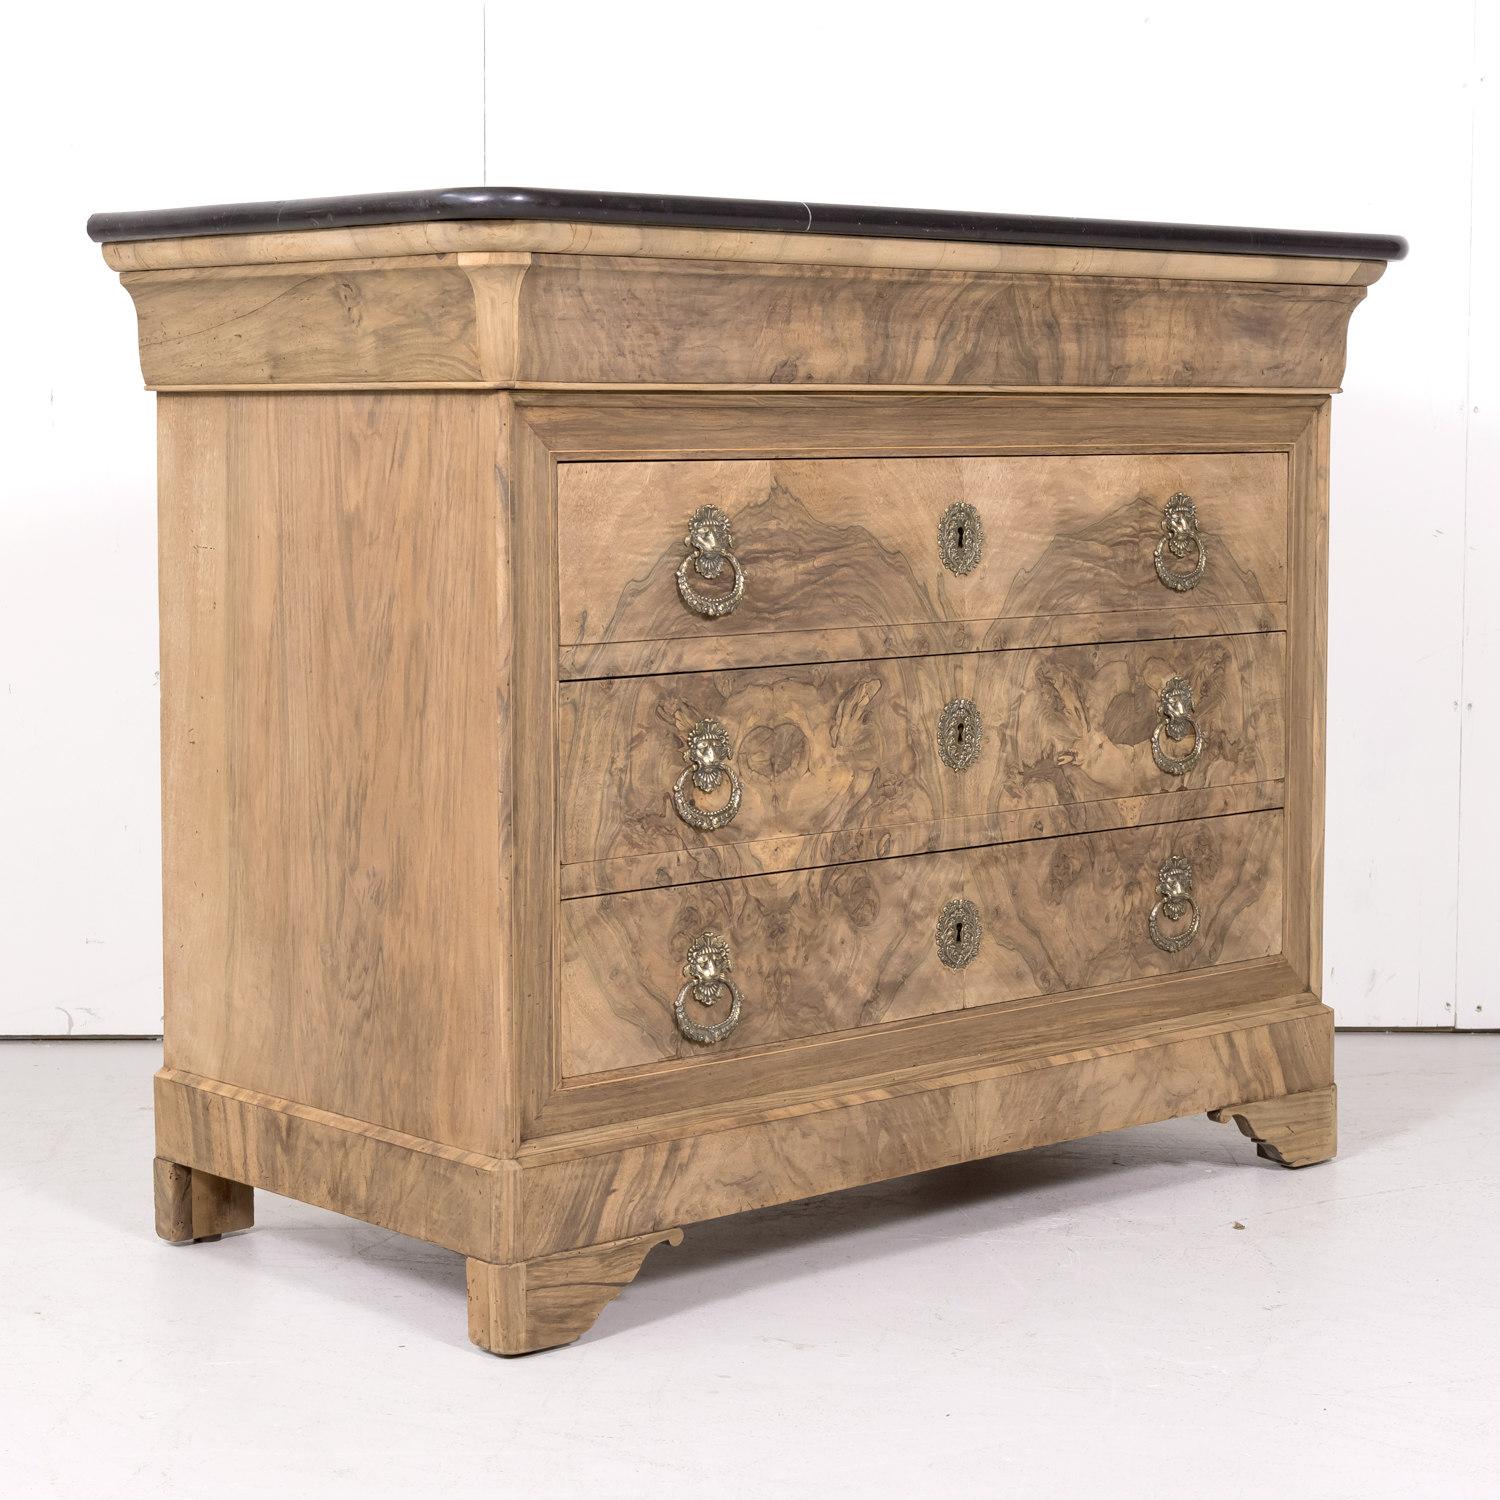 Late 19th Century Antique French Louis Philippe Style Bleached Bookmatched Burled Walnut Commode